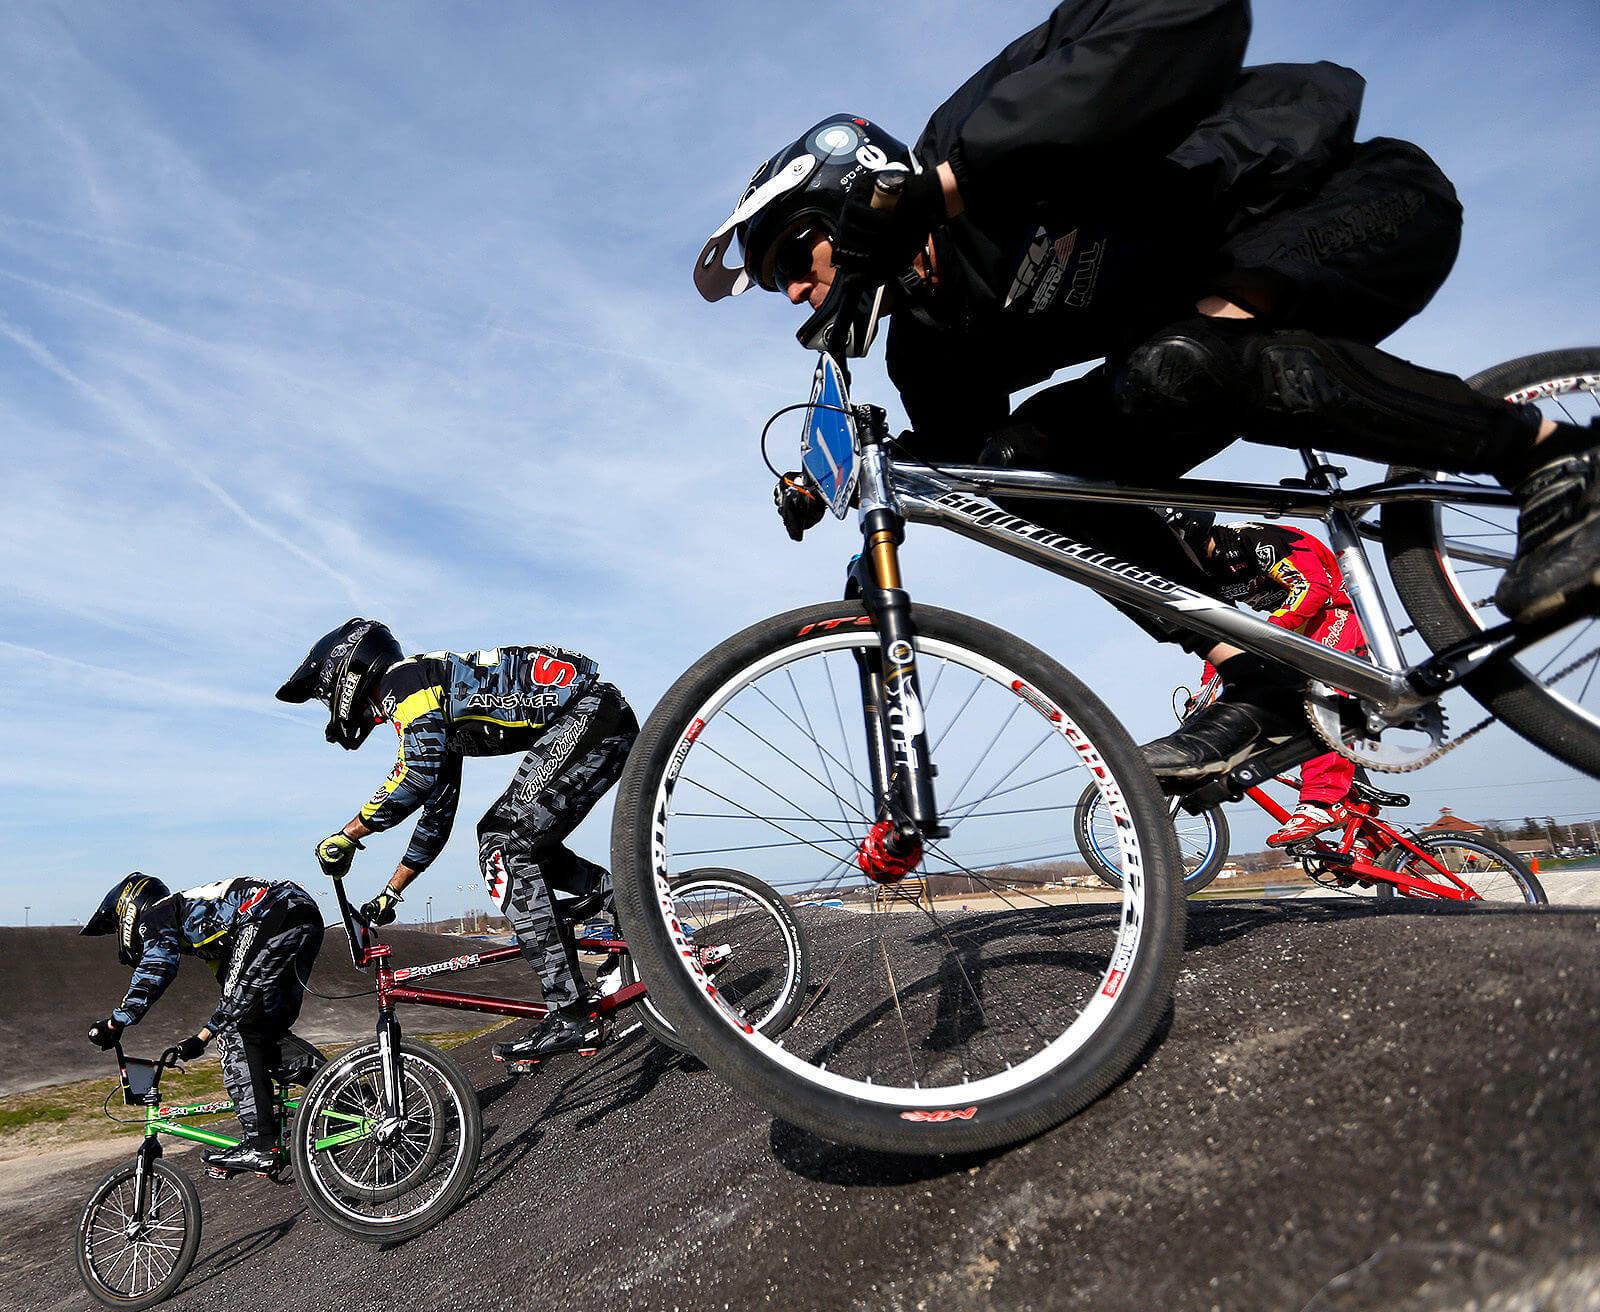 Mountain Bike Racing at The Rock captured by iNET photographers